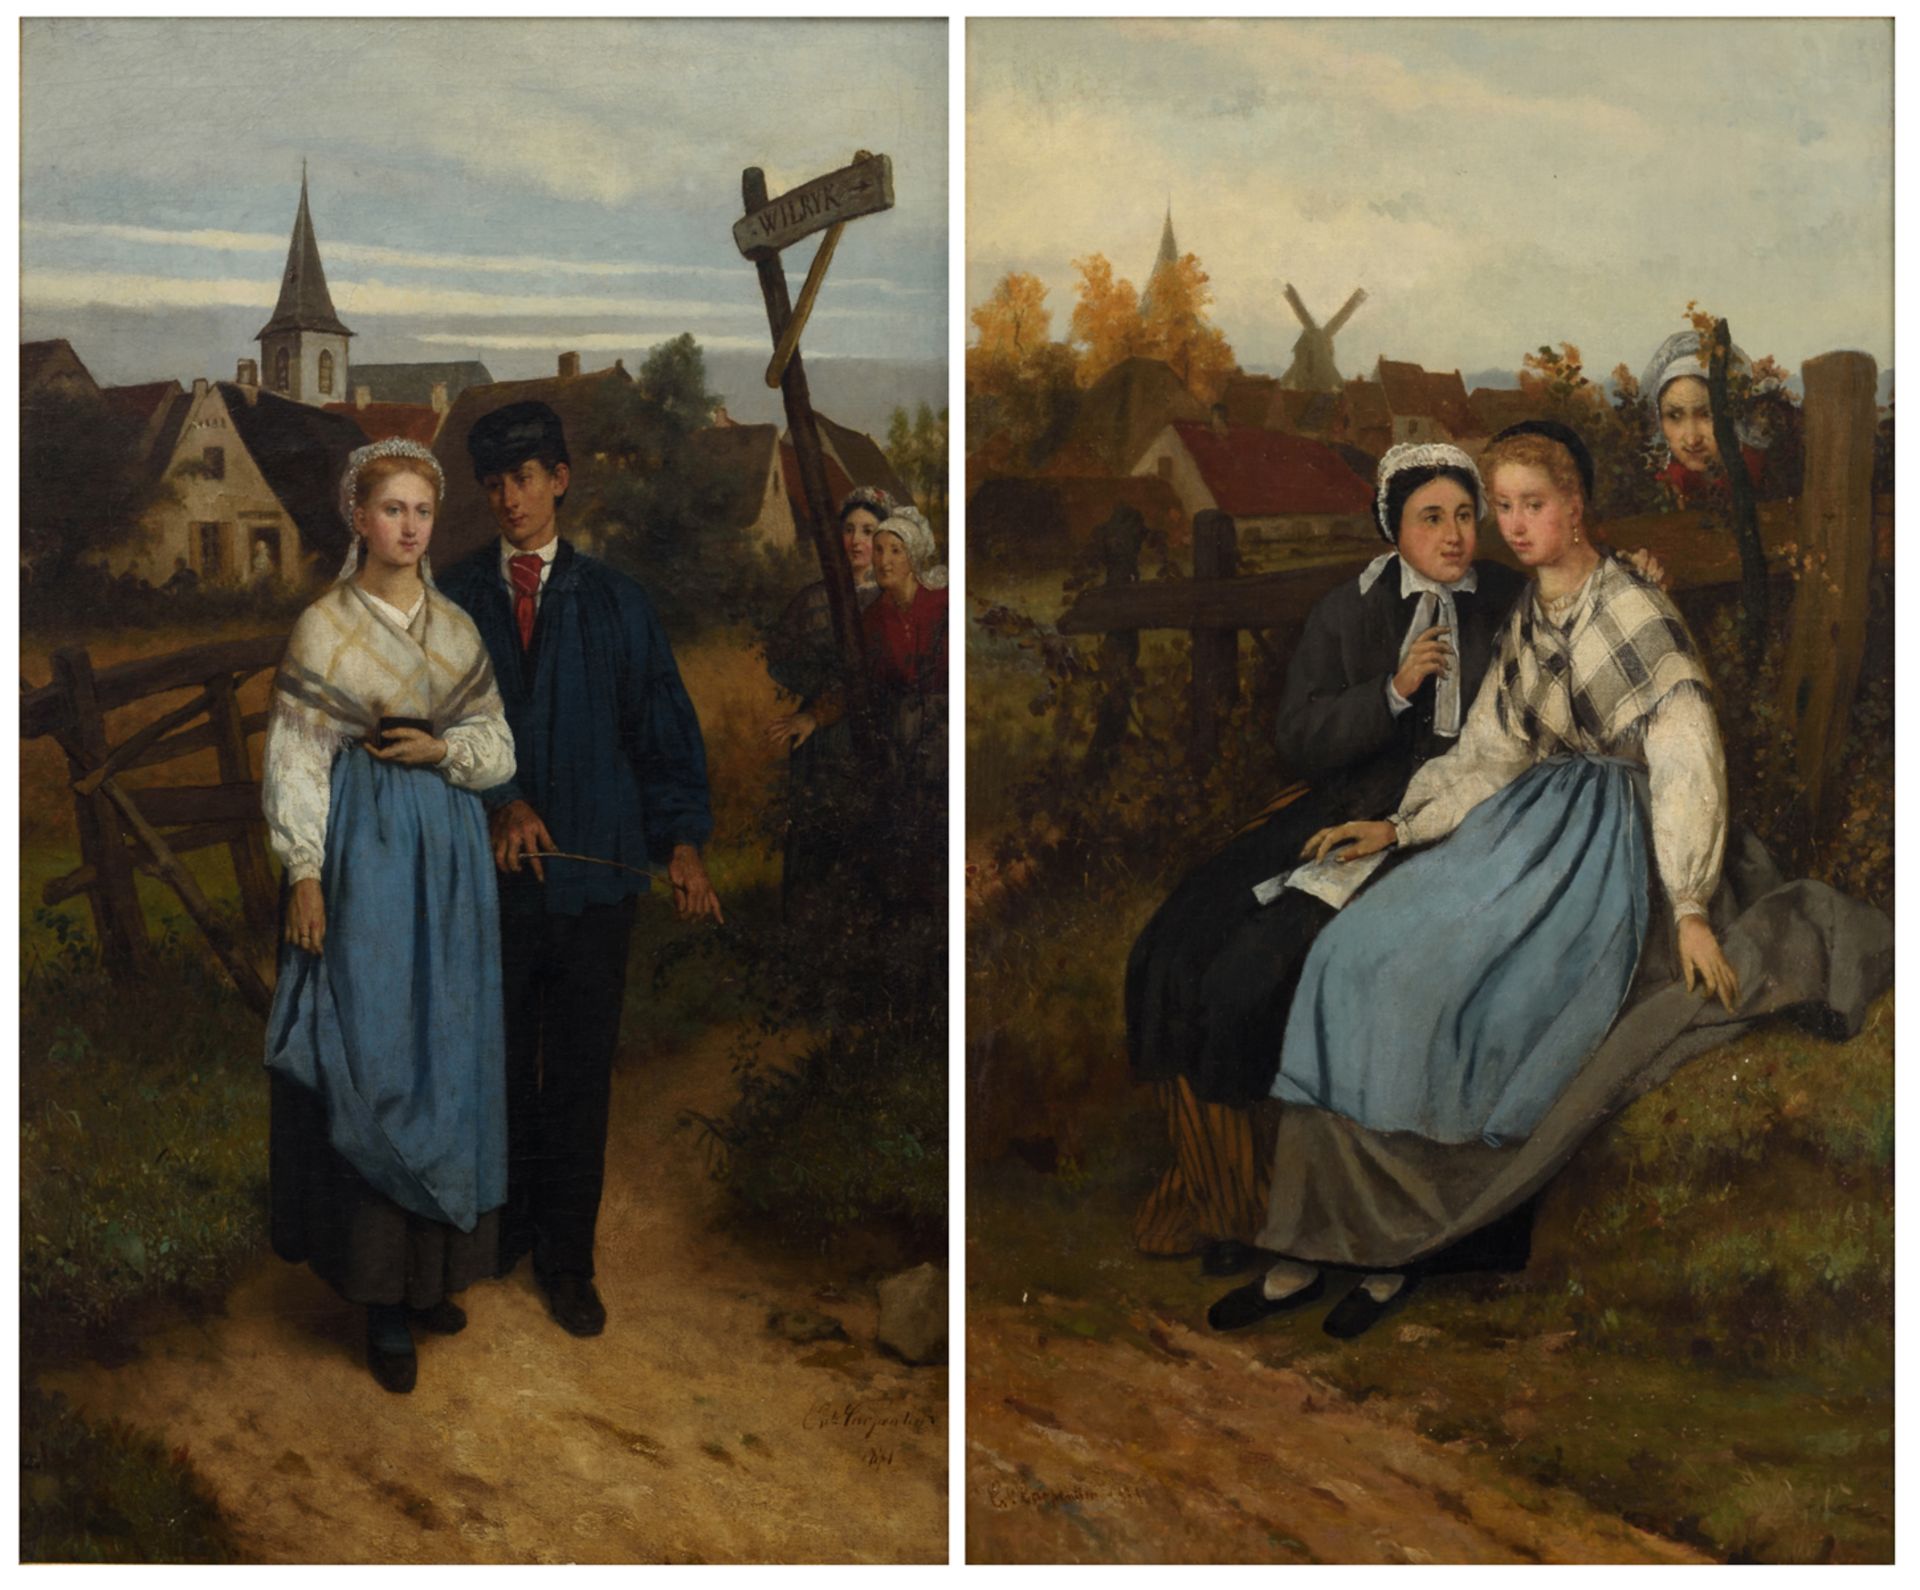 Carpentier E., two episodes of a rural love story, dated 1871, oil on canvas, part of the retrospect